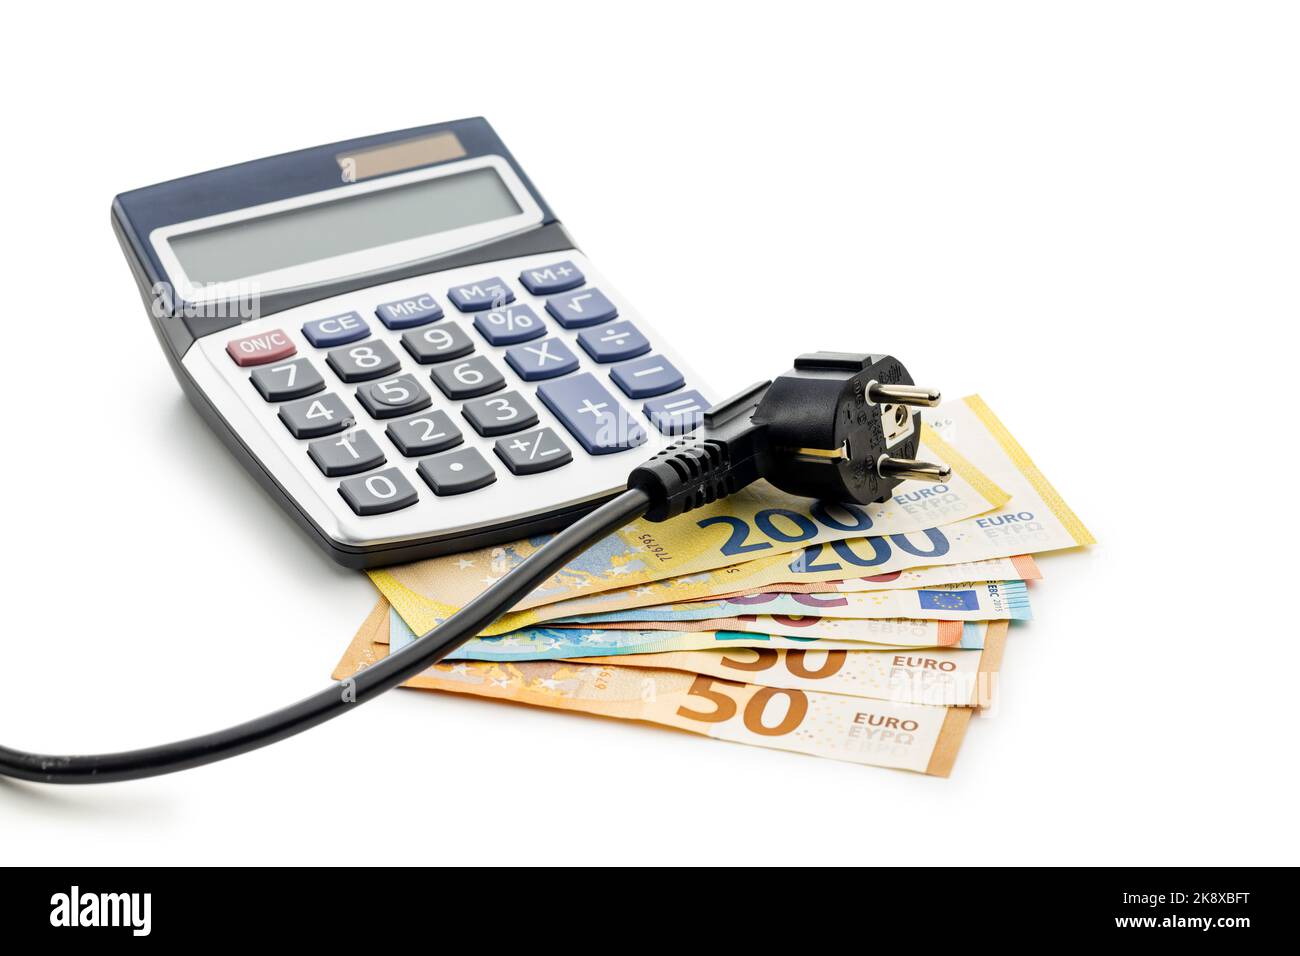 The energy savings concept with electric power plug, calculator  and euro money isolated on the white background. Stock Photo